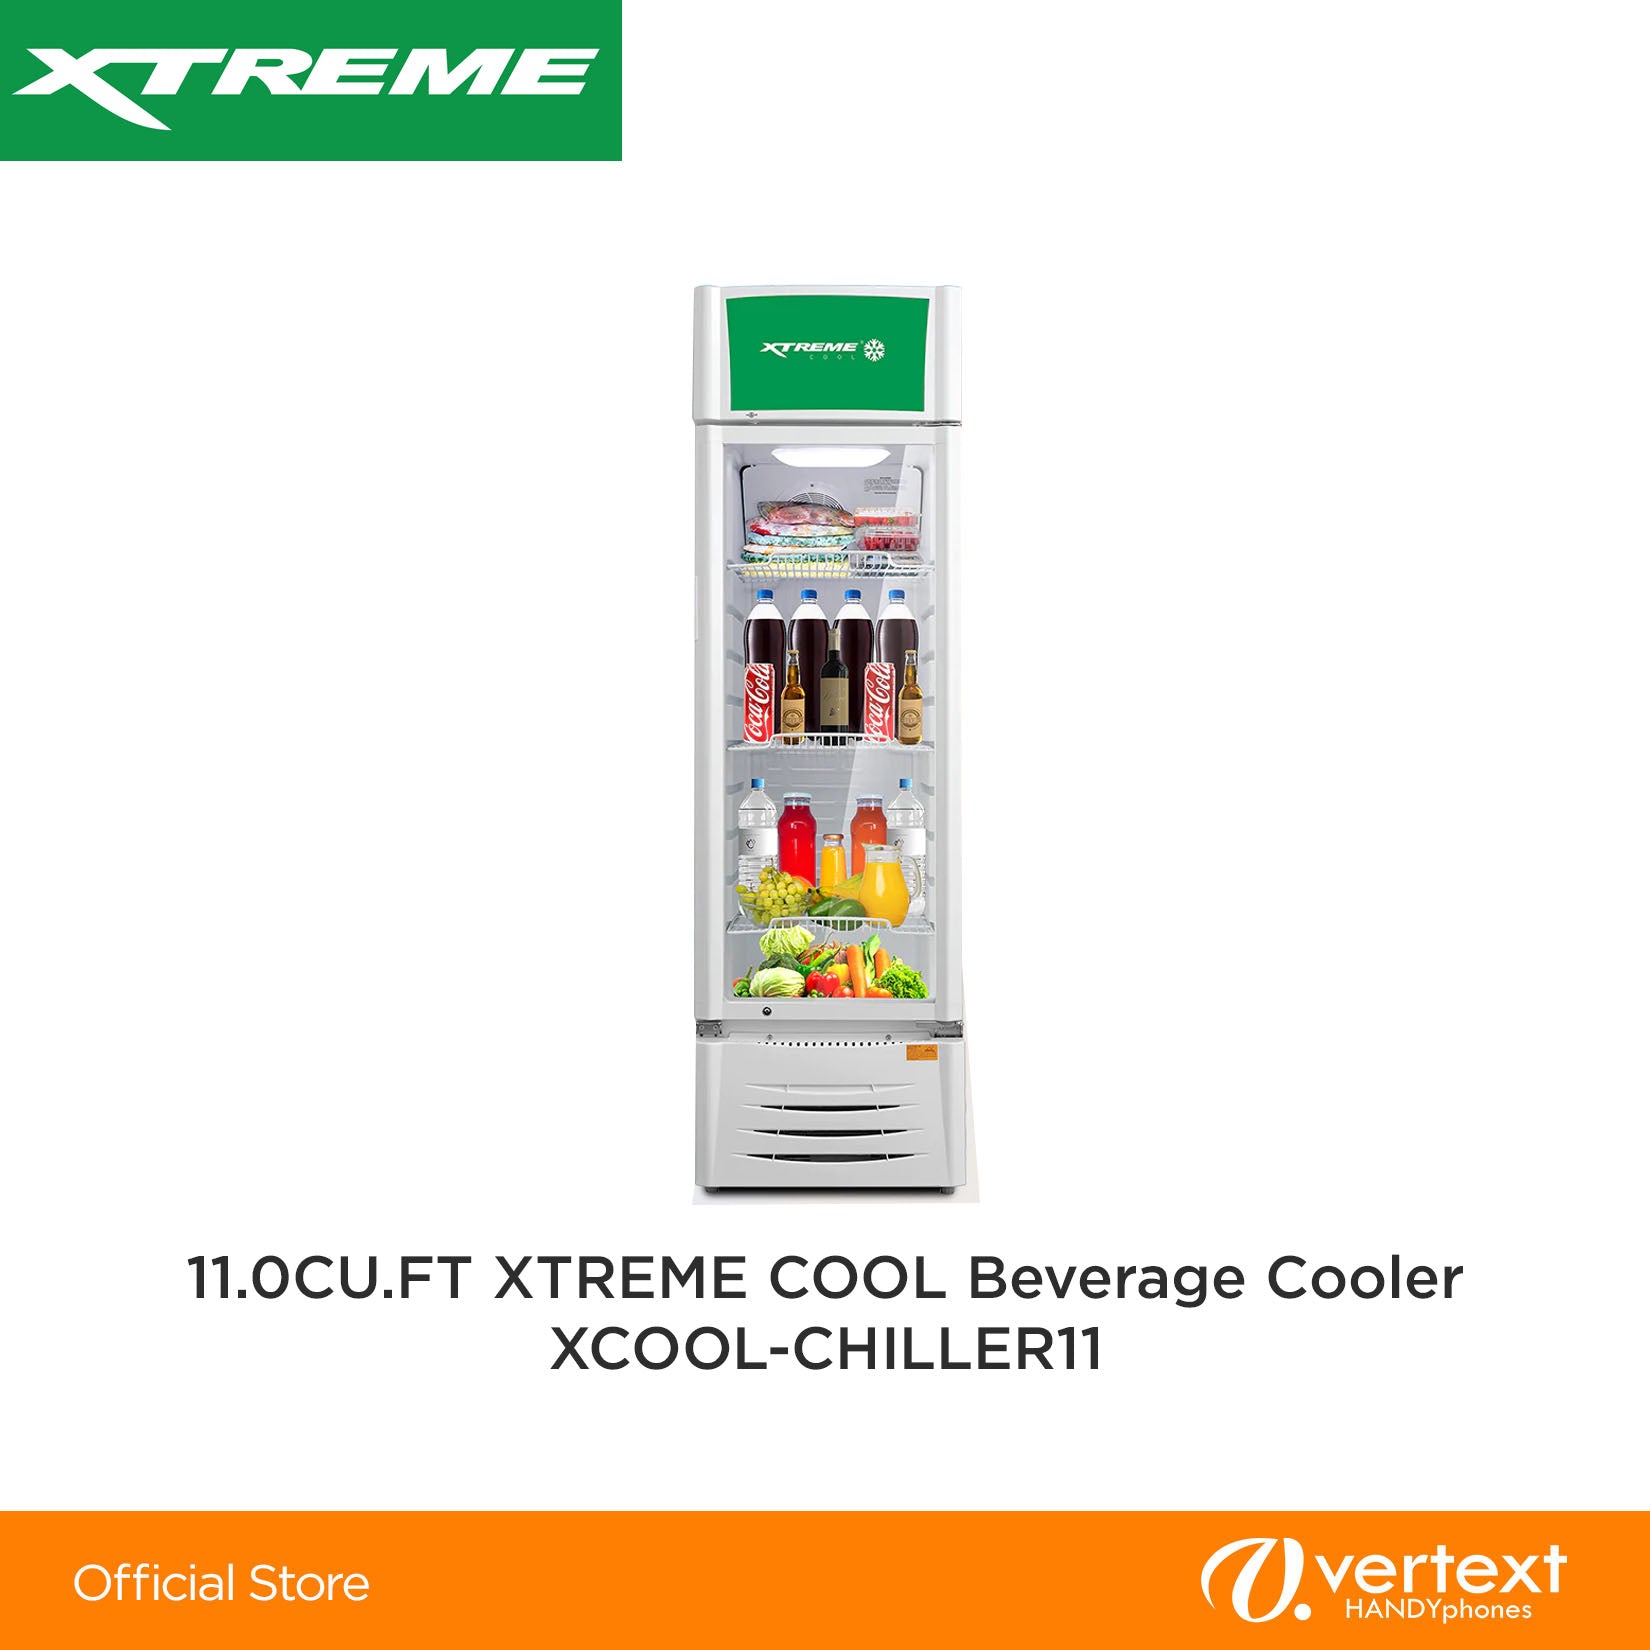 Xtreme XCOOL-CHILLER11